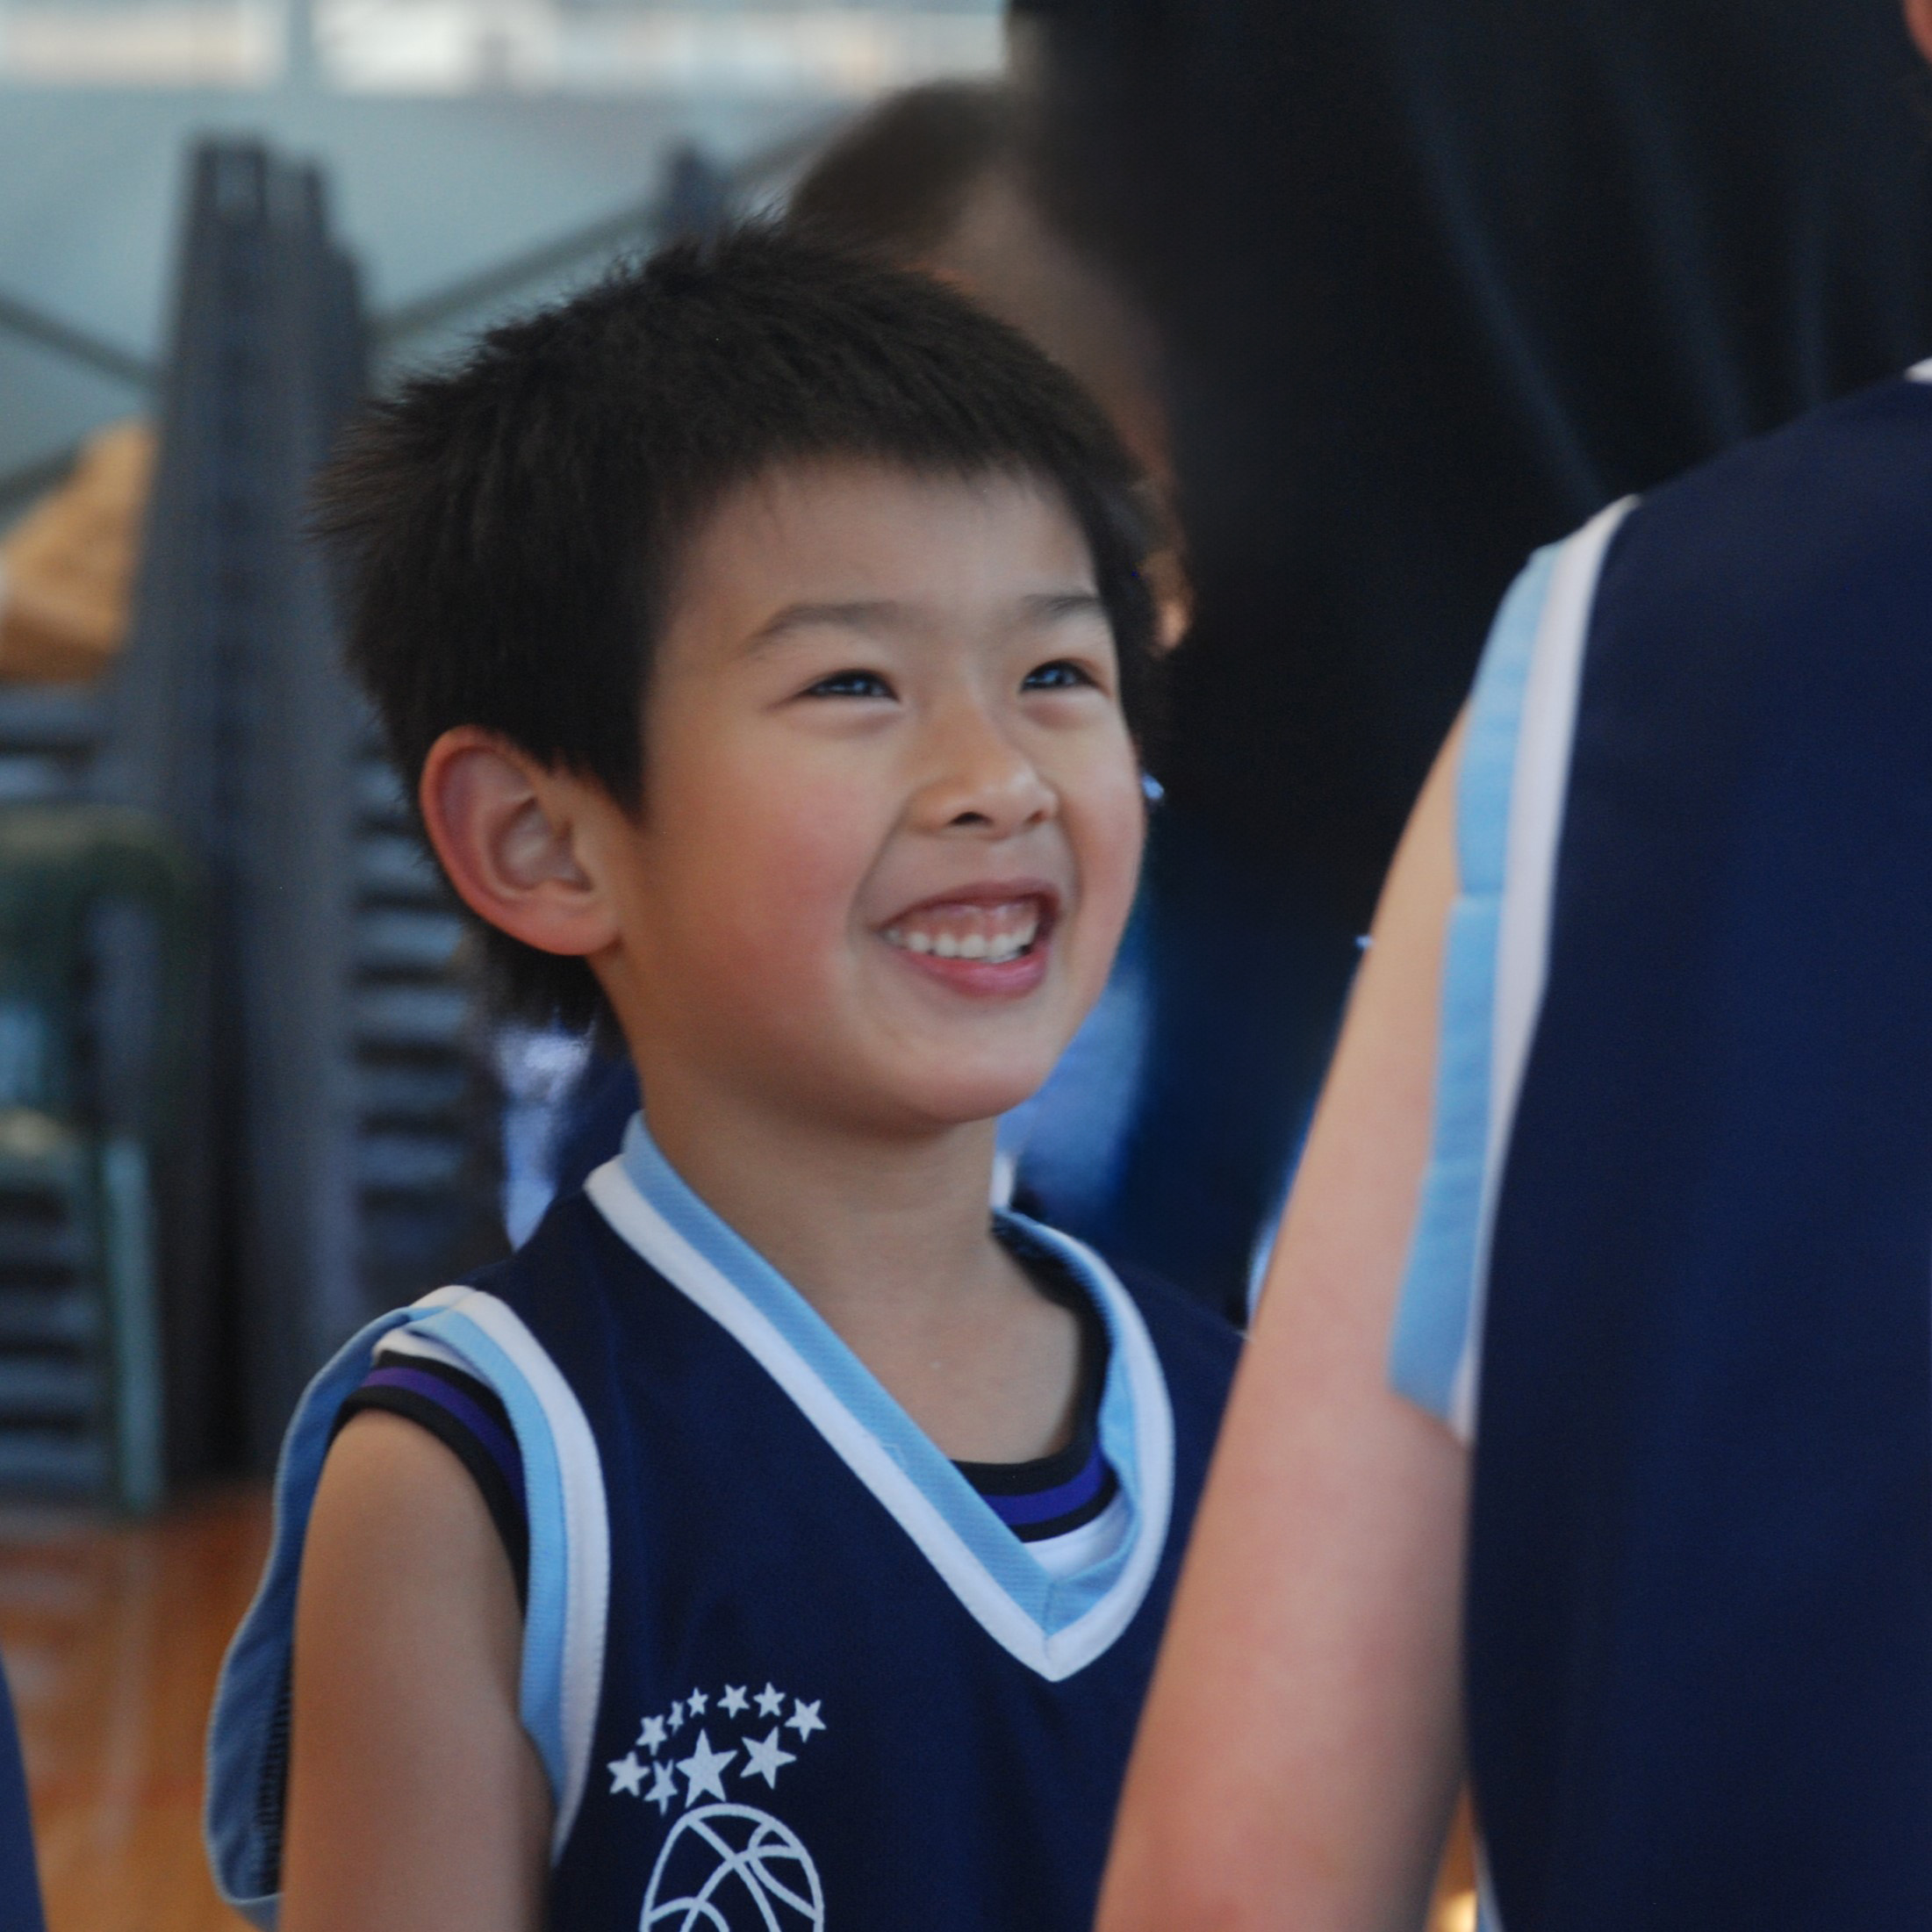 Young smiling player